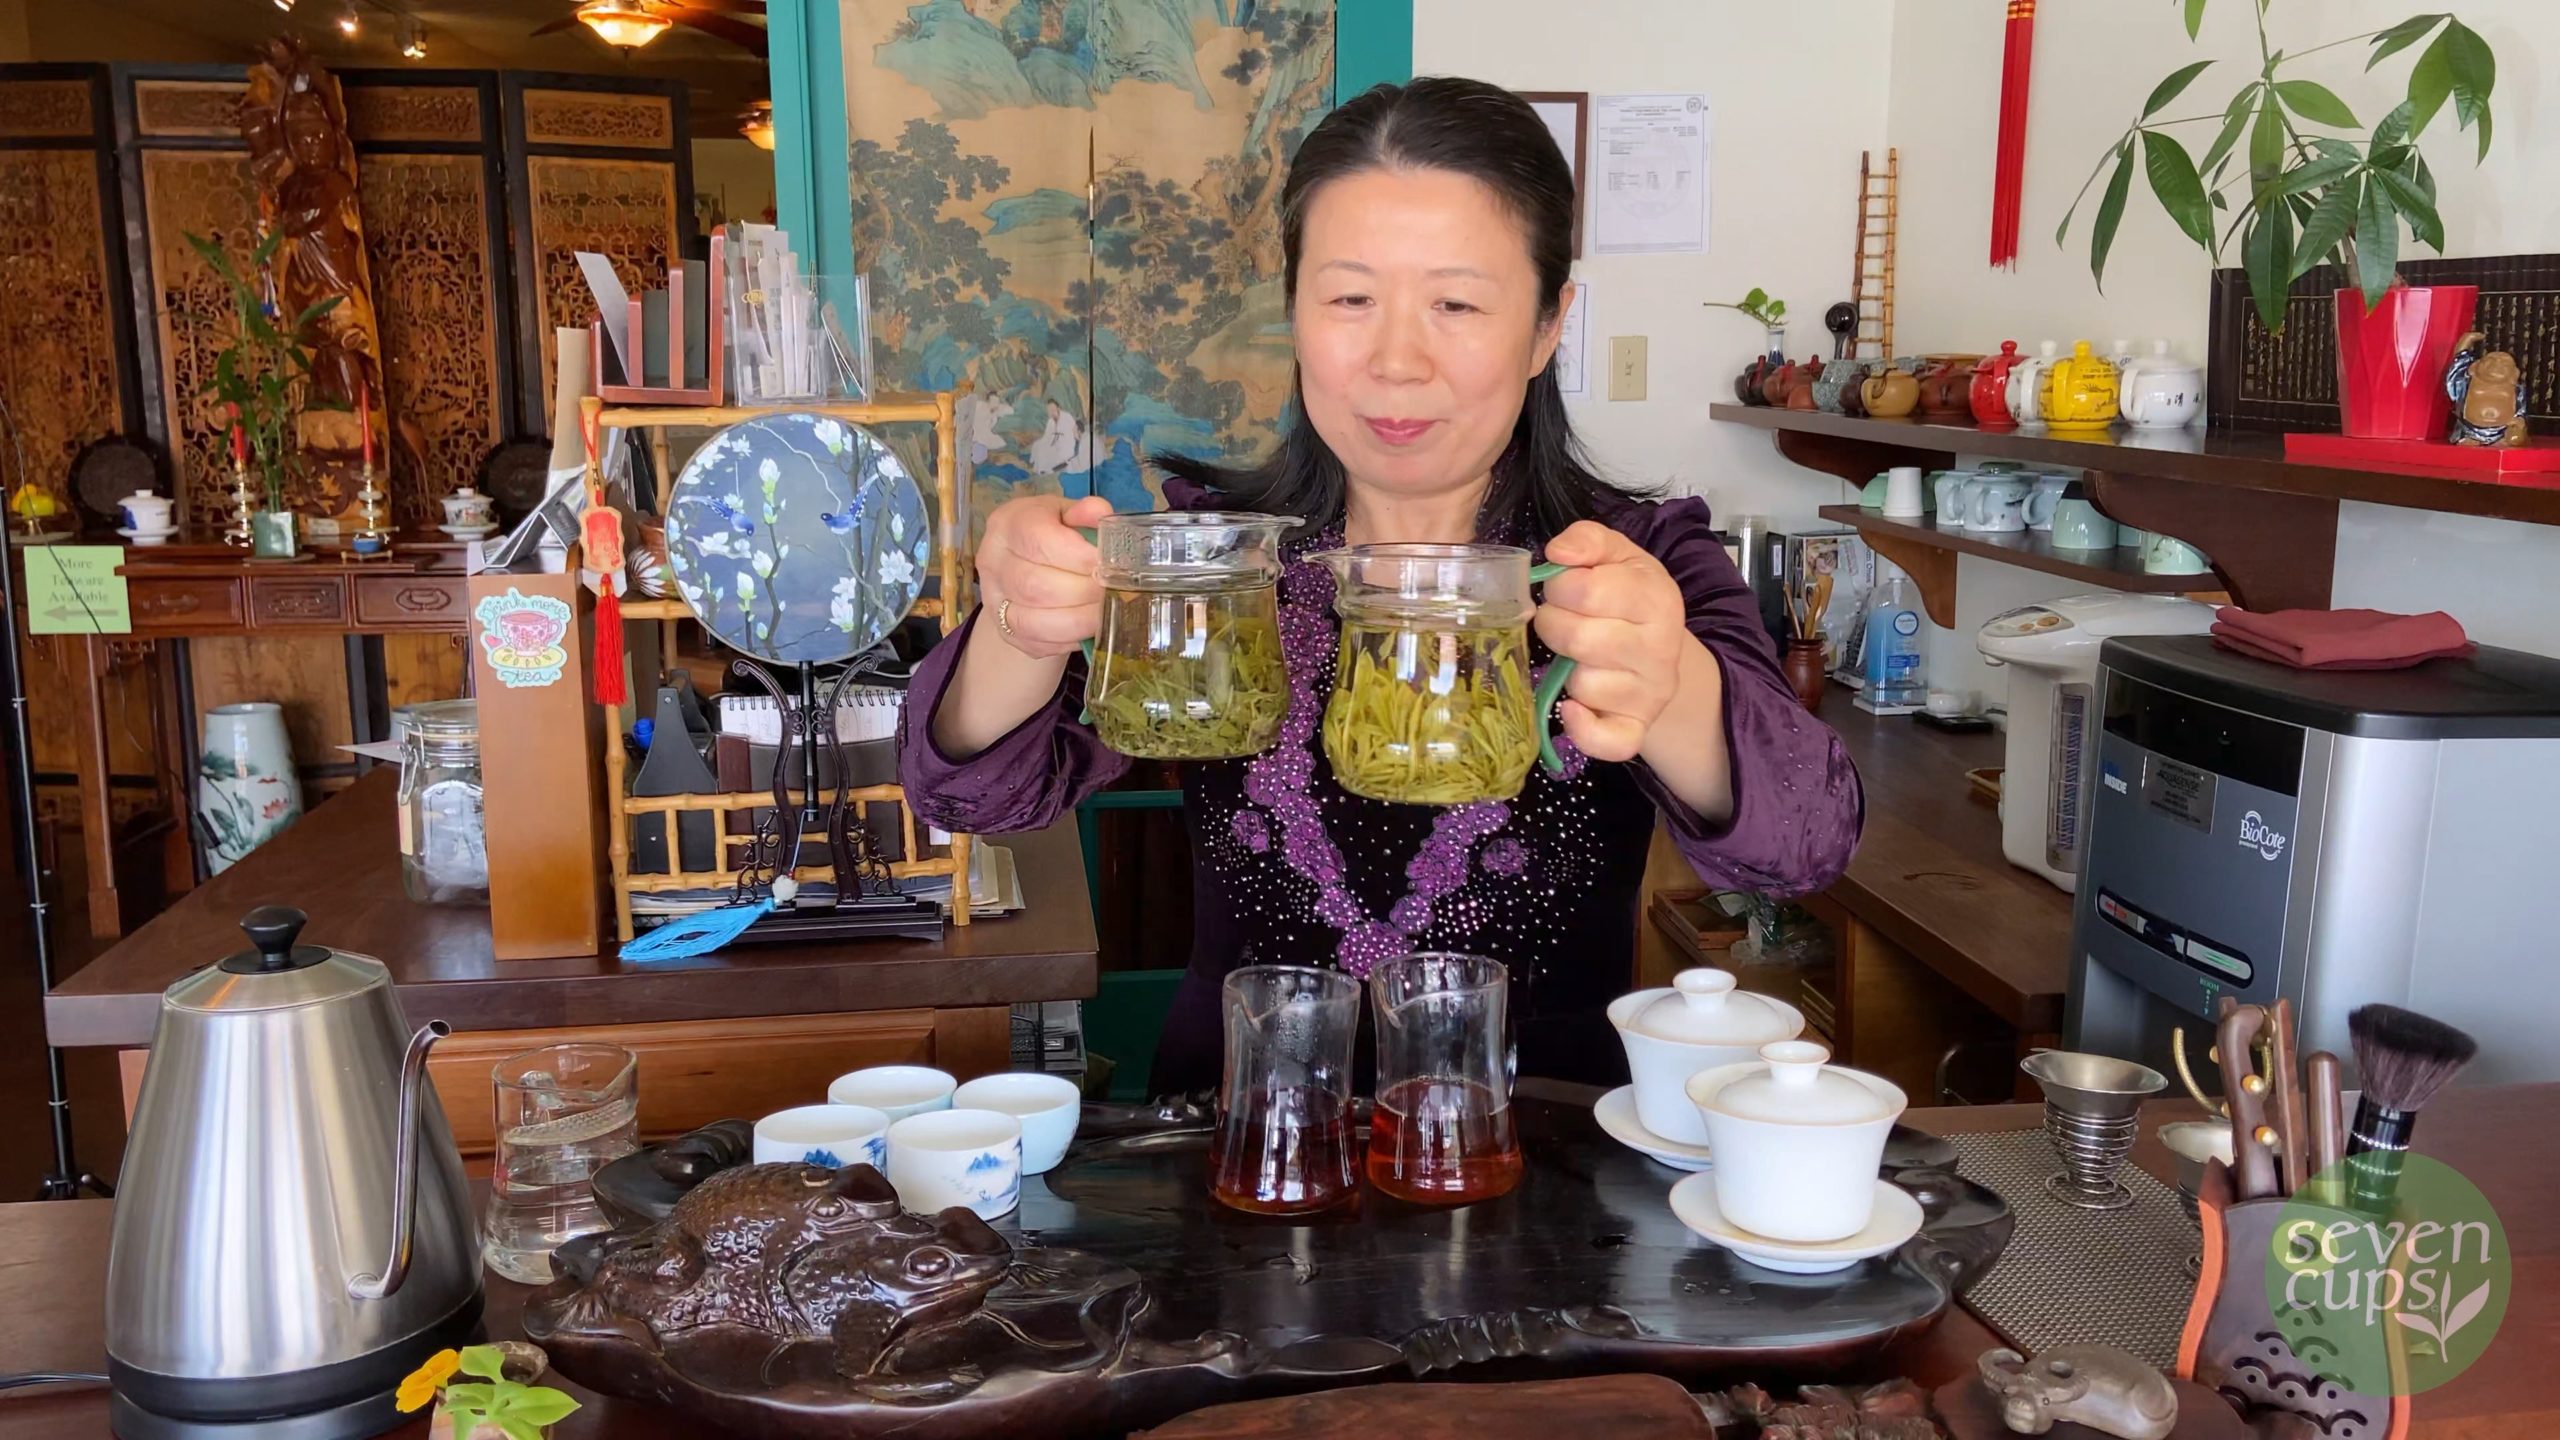 A woman standing in a traditional Chinese teahouse, smiling and holding up two glass pitchers filled with green tea side by side.